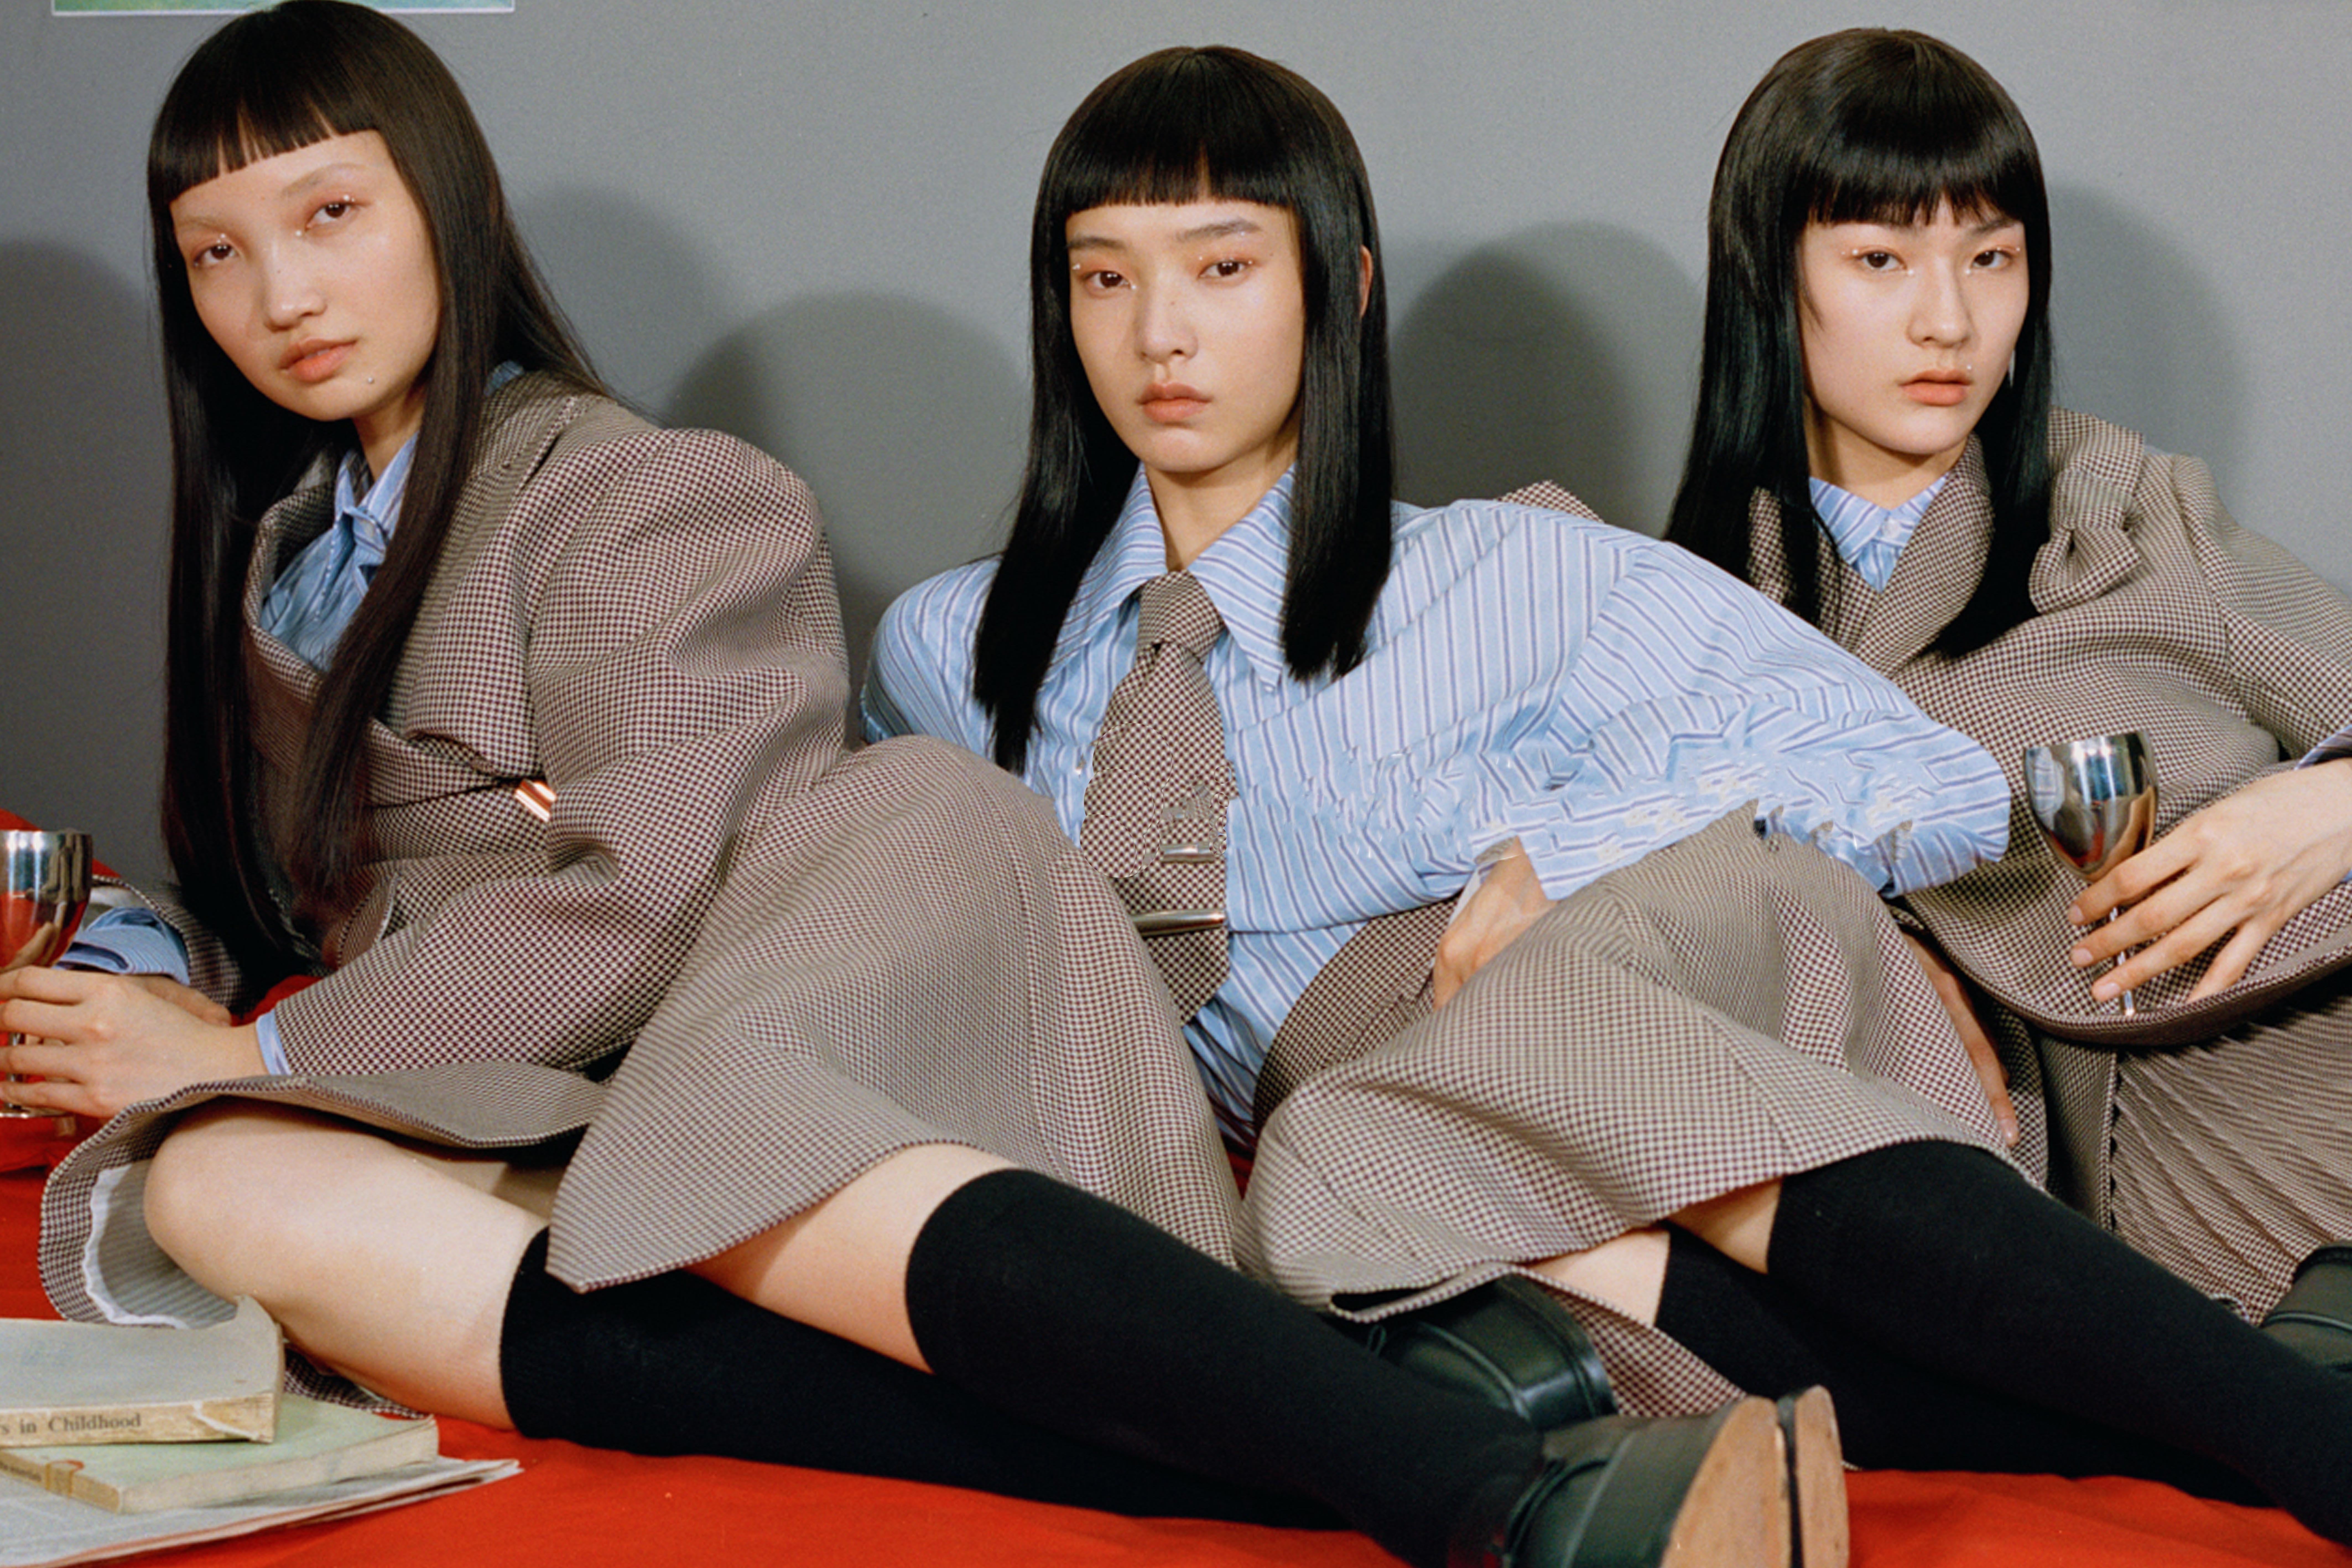 SHUSHU/TONG Fall/Winter 2018 Campaign Collection Lookbook Chinese UK School Uniforms Designer